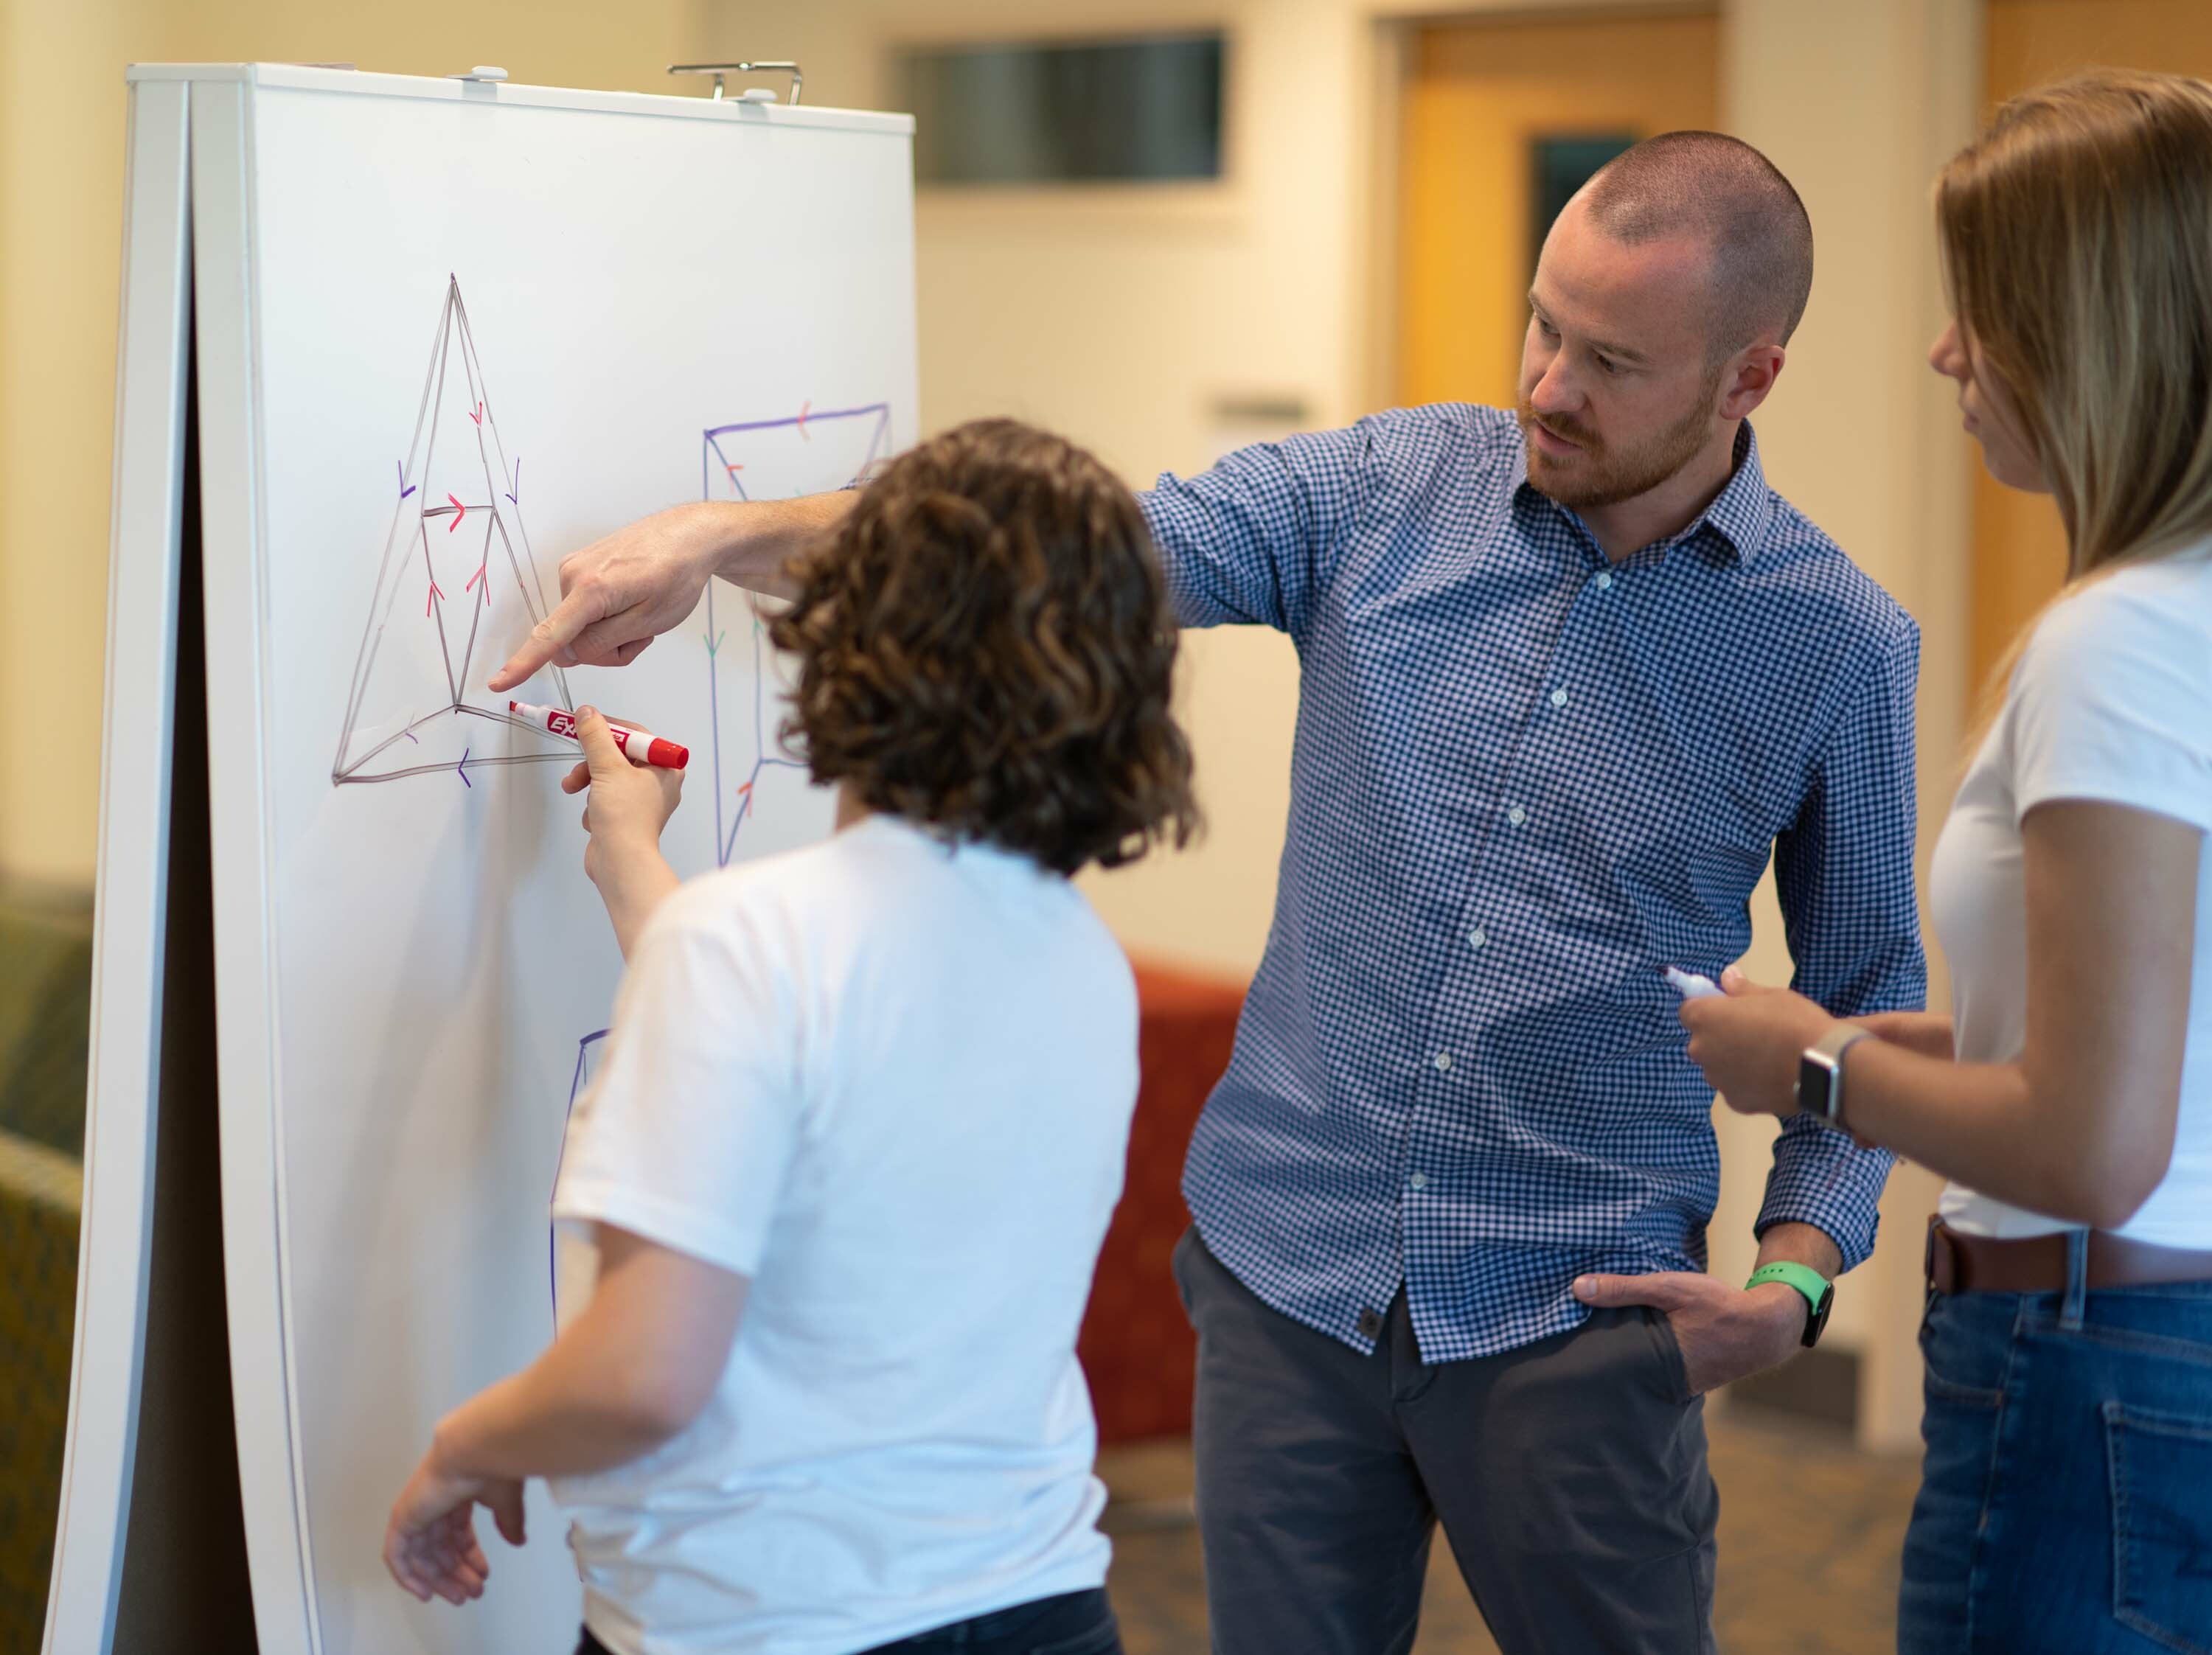 A professor and two students work on a diagram on a whiteboard